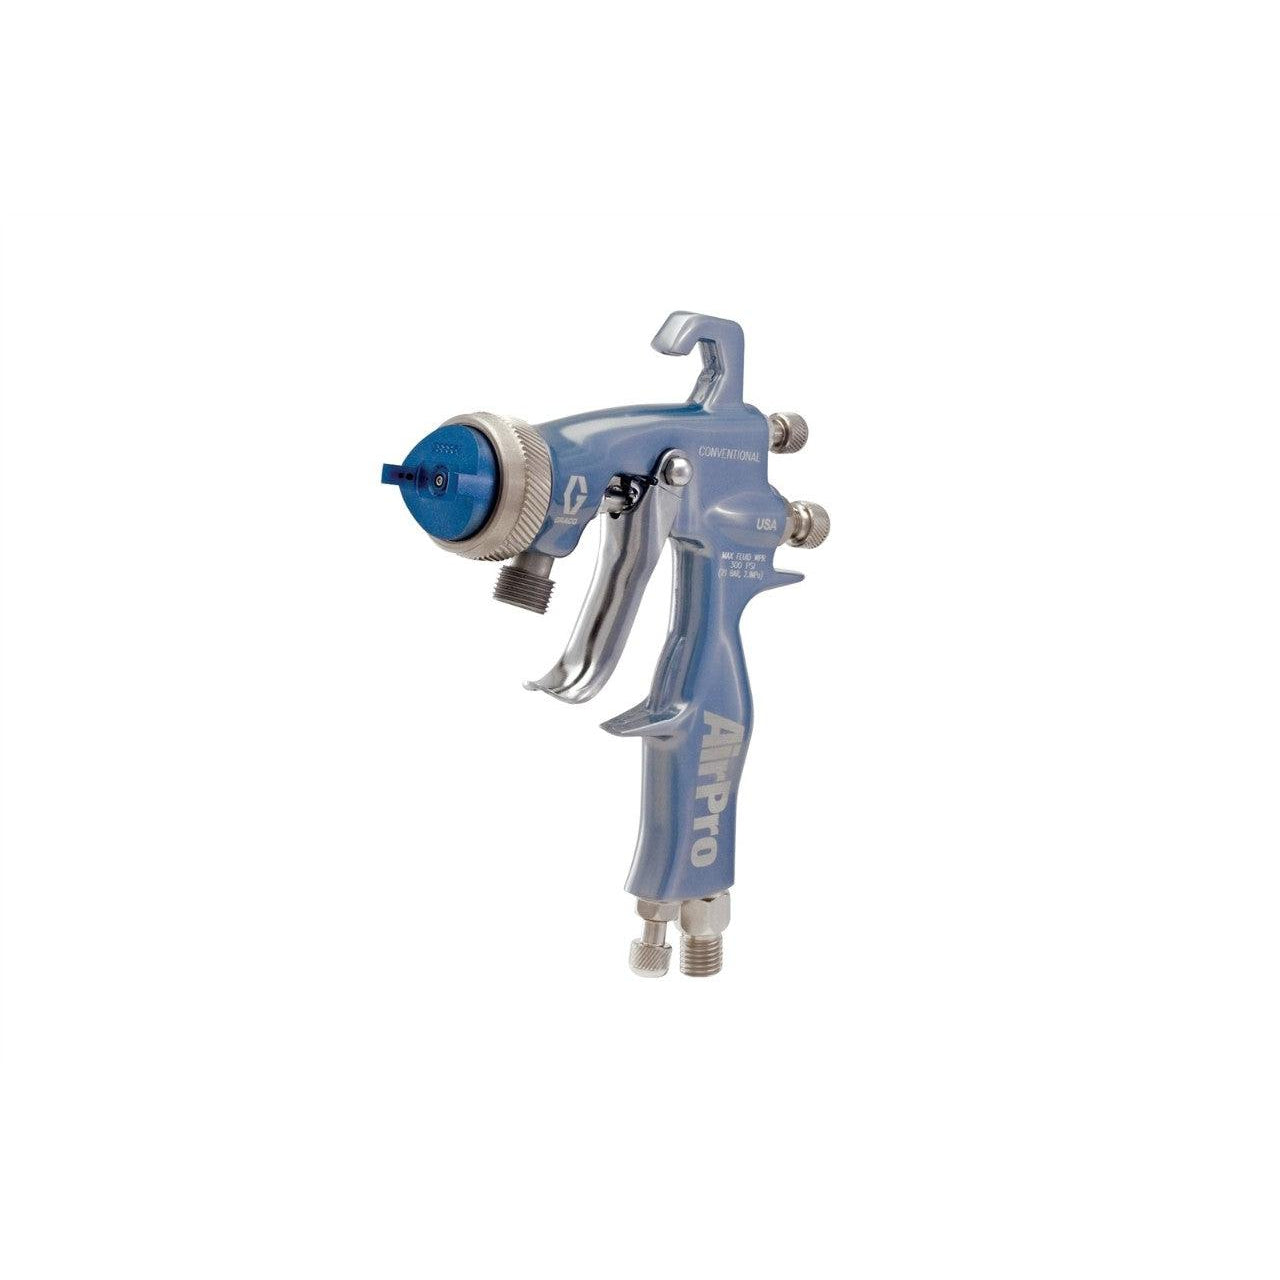 AirPro Air Spray Pressure Feed Gun, Conventional, 0.042 inch (1.1 mm) Nozzle, for Waterborne Applications